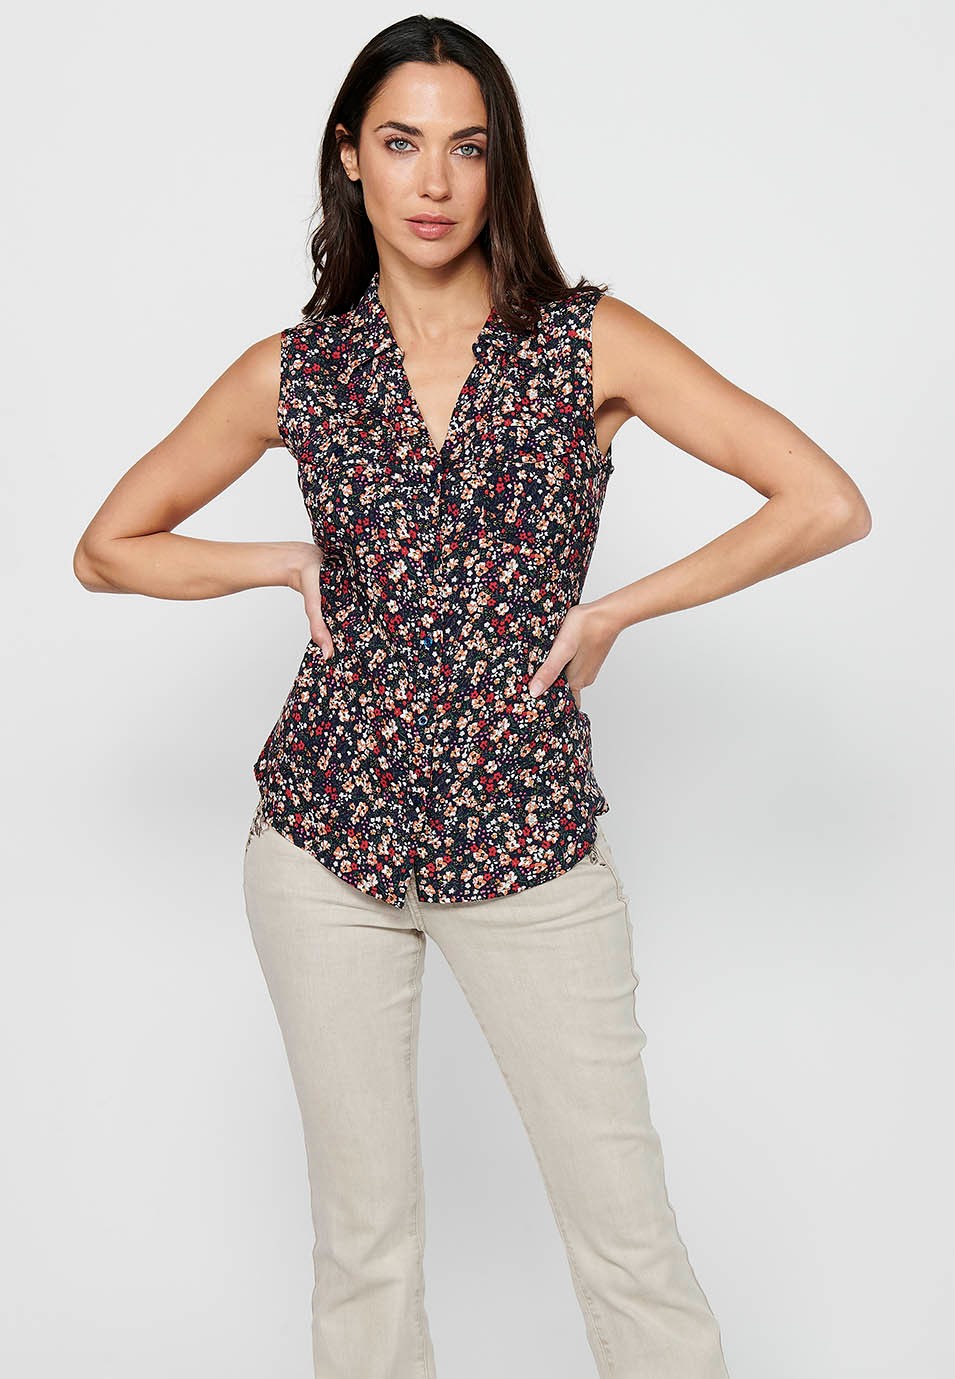 Sleeveless blouse, V-neck, front closure with buttons, floral print for women in Navy